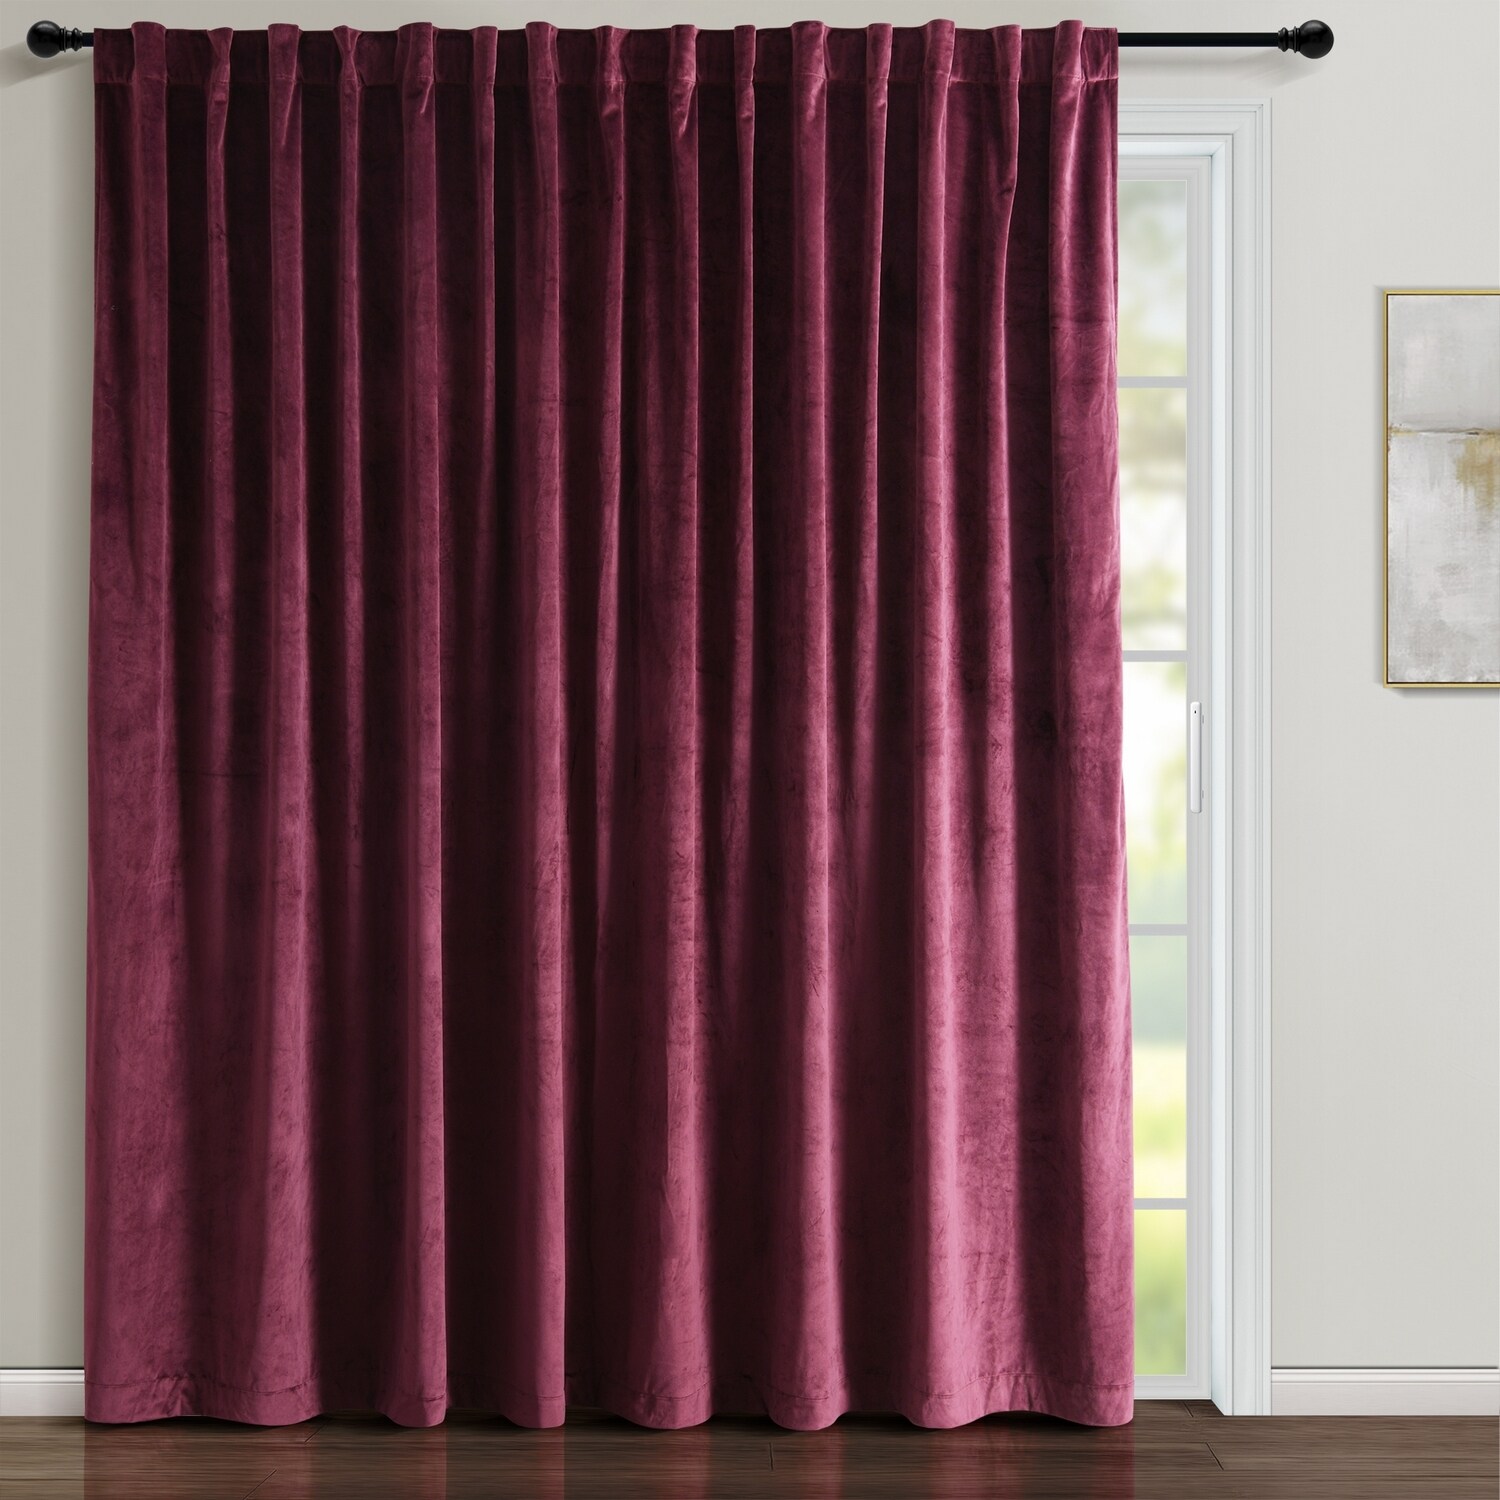 PLUM WITH GOLD HANGING CHANDELIERS & STRIPES BATH MAT